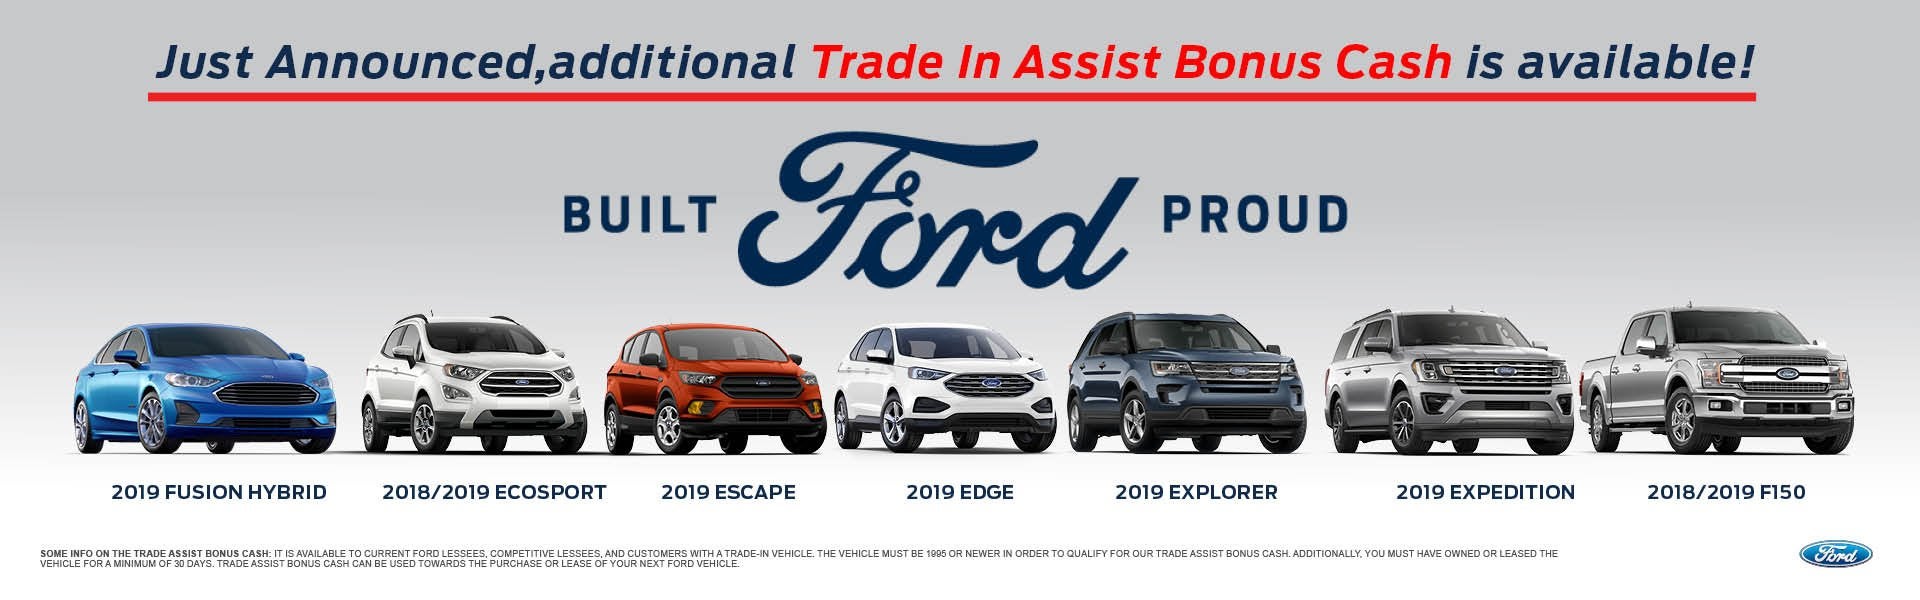 Just Announced, additional Trade In Assist Bonus Cash is available!